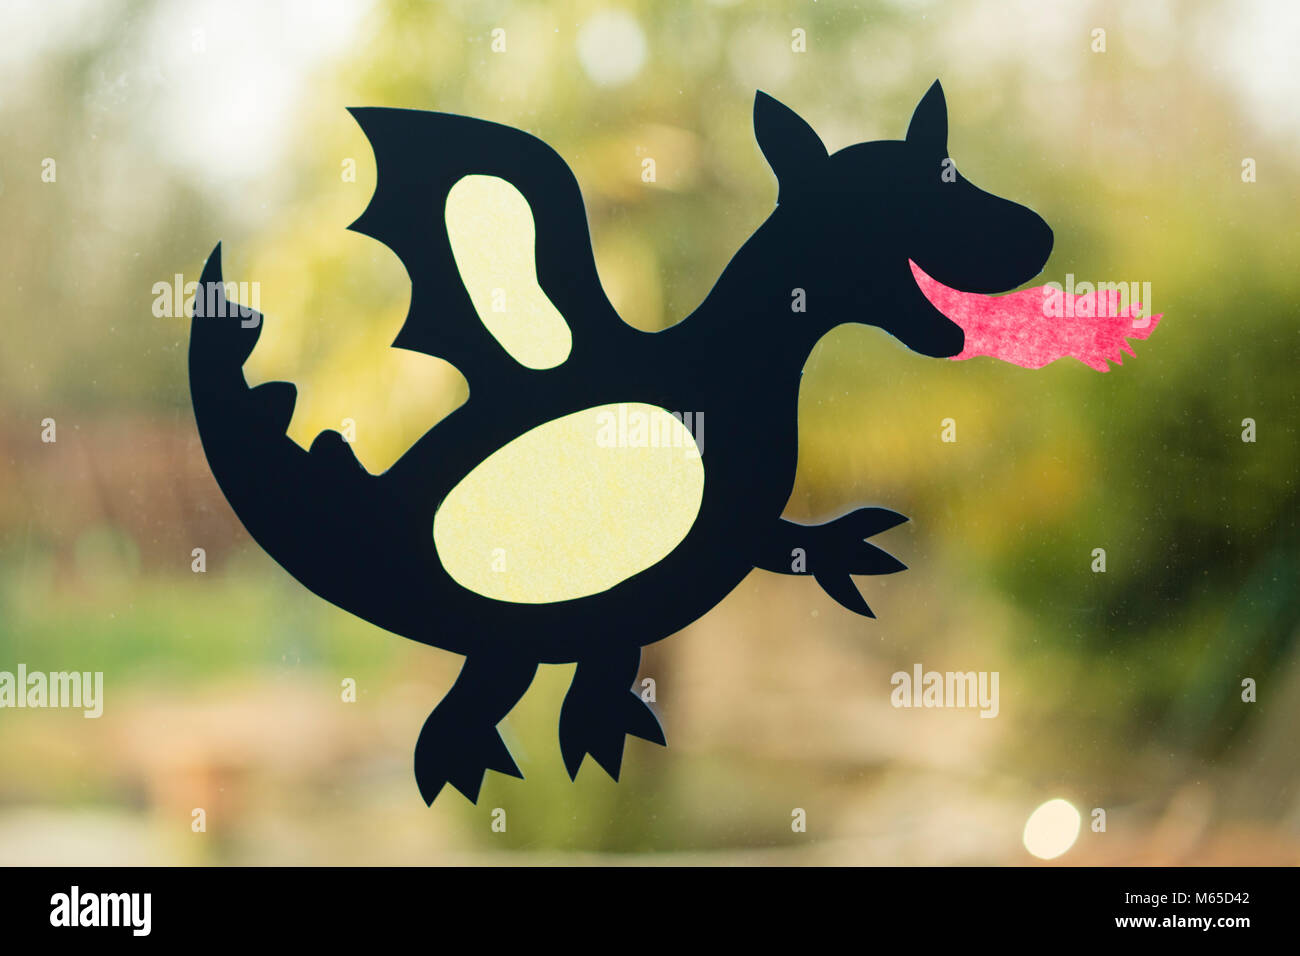 shape of a dragon made with paper as handicraft activity for children and placed on window glass. Stock Photo